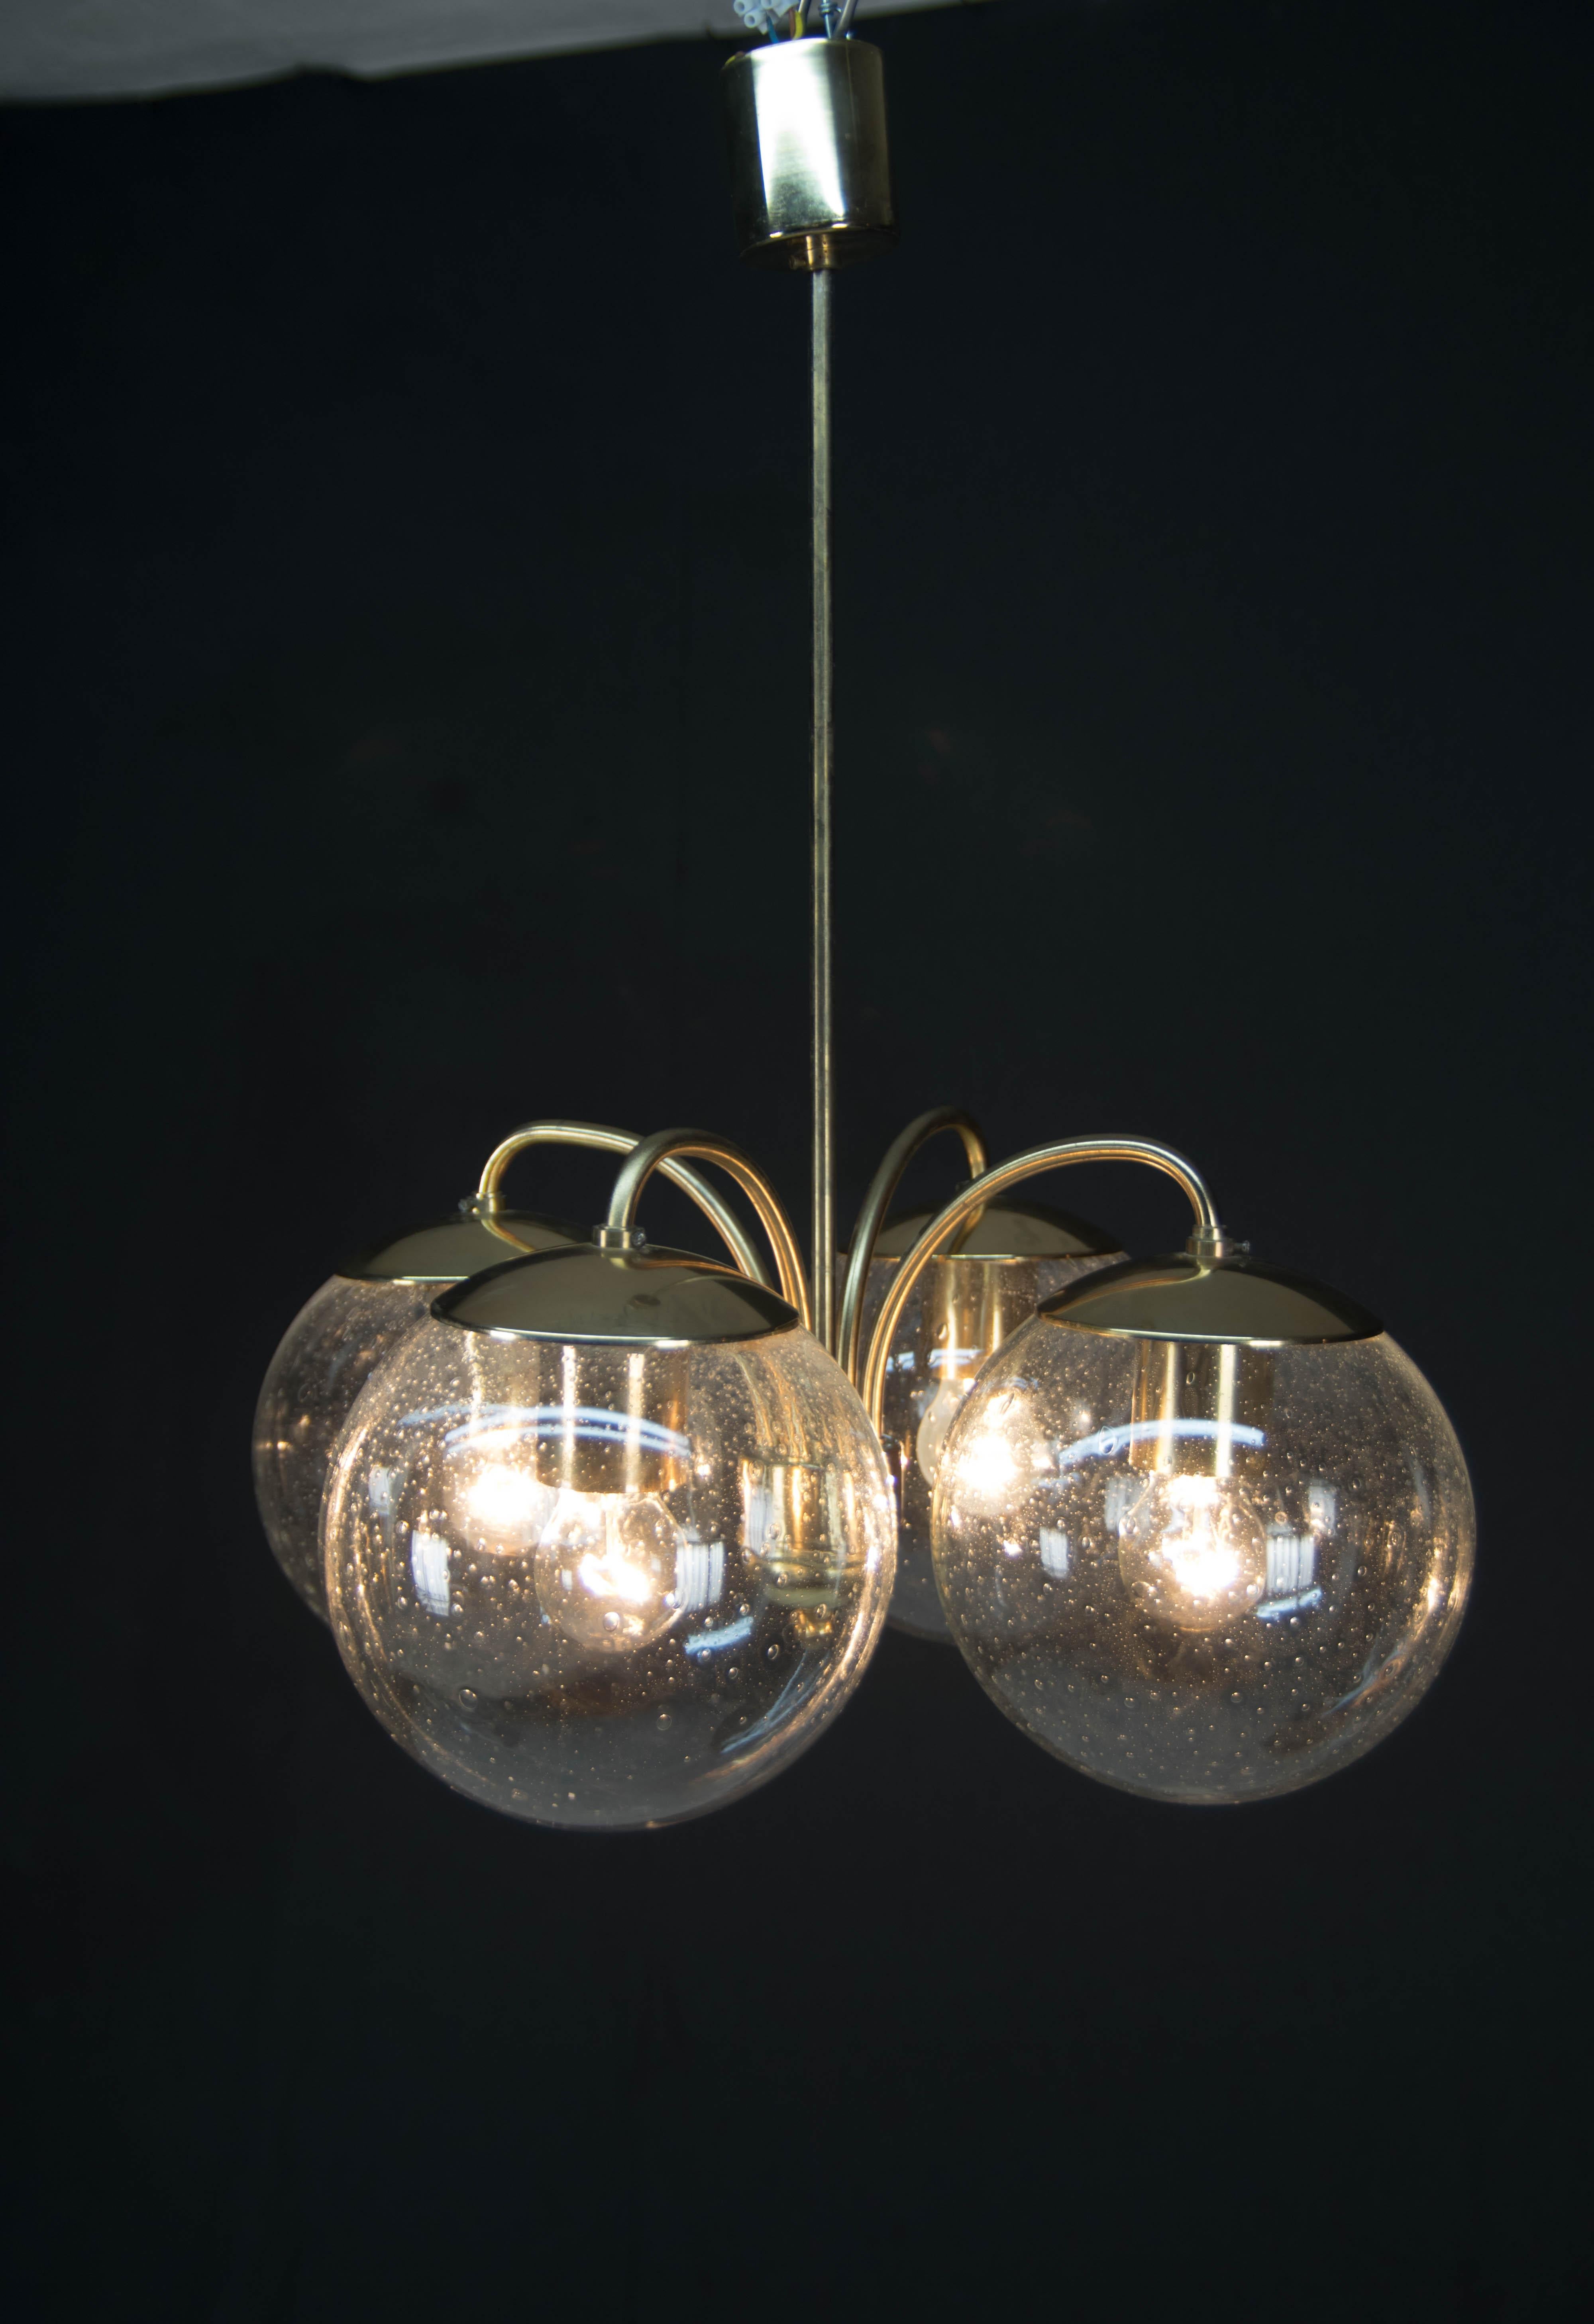 Blown bubble glass
4 x 60W, E25-E27 bulbs
Two separate circuits 2+2 bulbs
US wiring compatible
Good original condition, polished
Diameter of the globe 20cm.